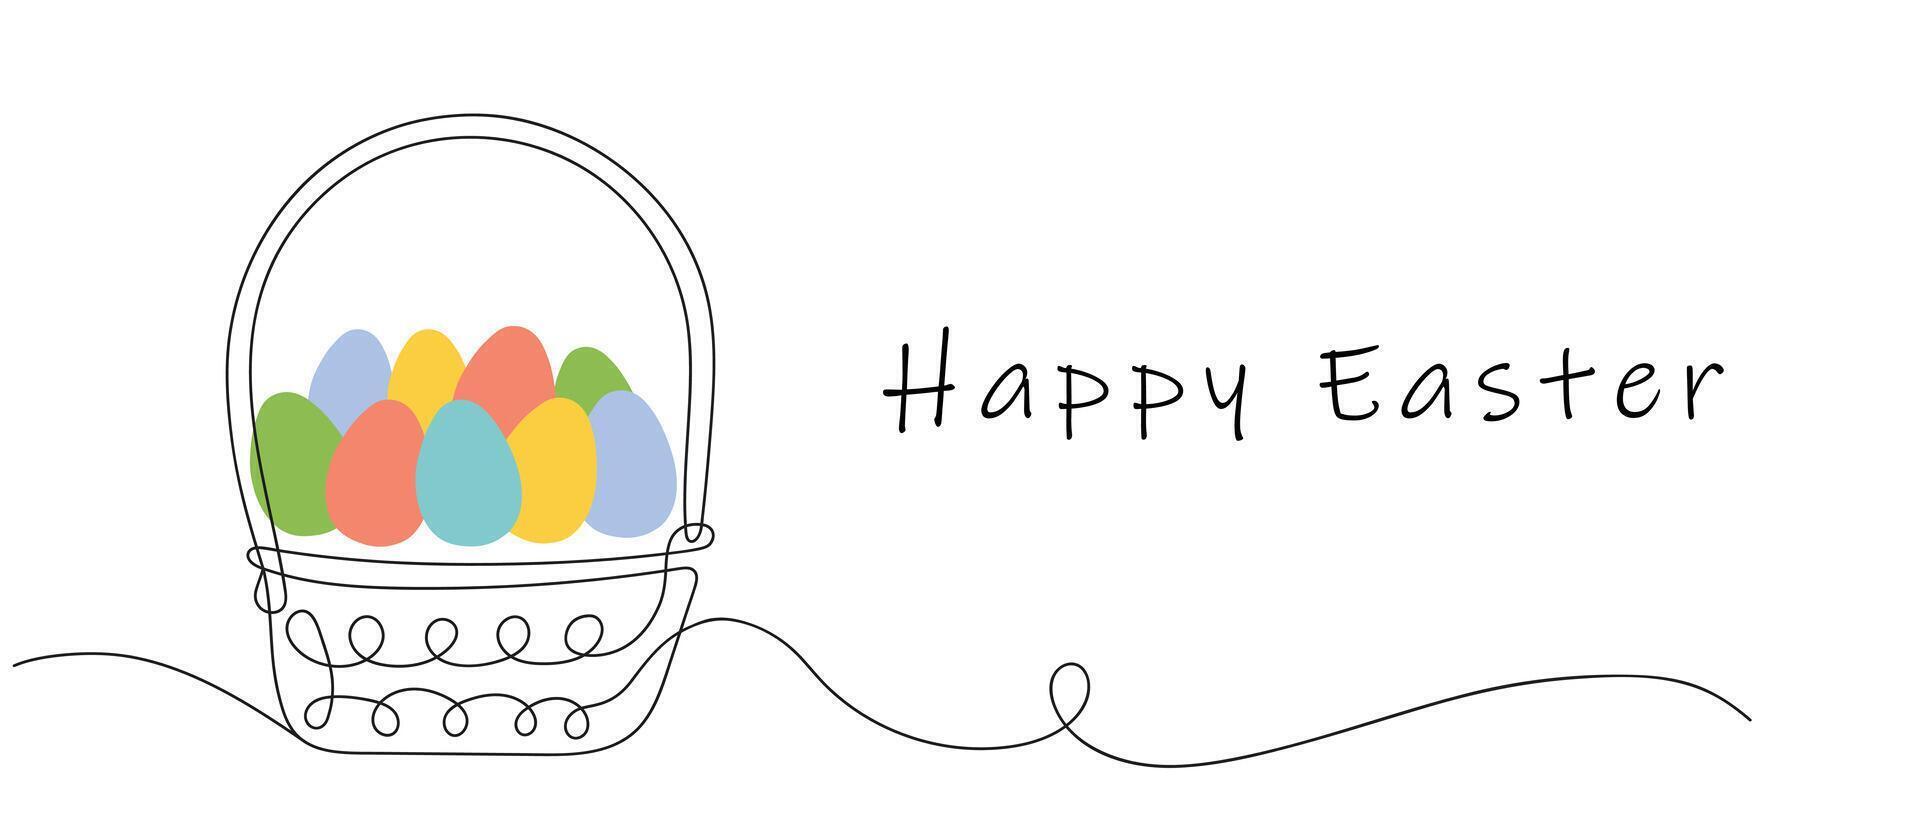 Wicker basket with colorful Easter eggs and Happy Easter greeting. Continuous one line drawing. Isolated on a white background. Minimalist style. Greeting cards, holiday banner. vector